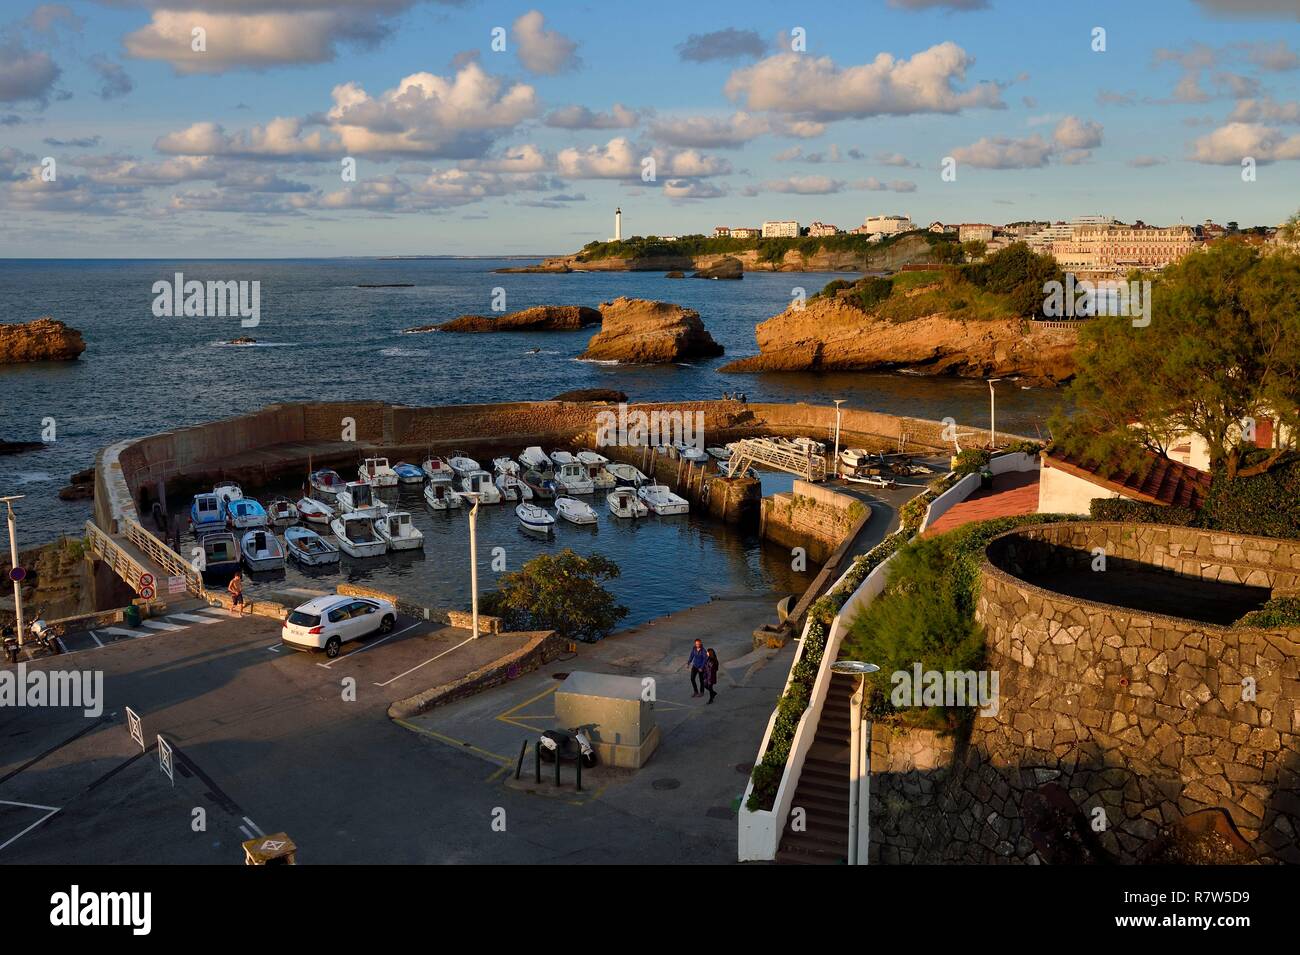 France, Pyrenees Atlantiques, Basque Country, Biarritz, Port des Pecheurs, the lighthouse and the Hotel du Palais located on Grande Plage (Great beach) in the background Stock Photo